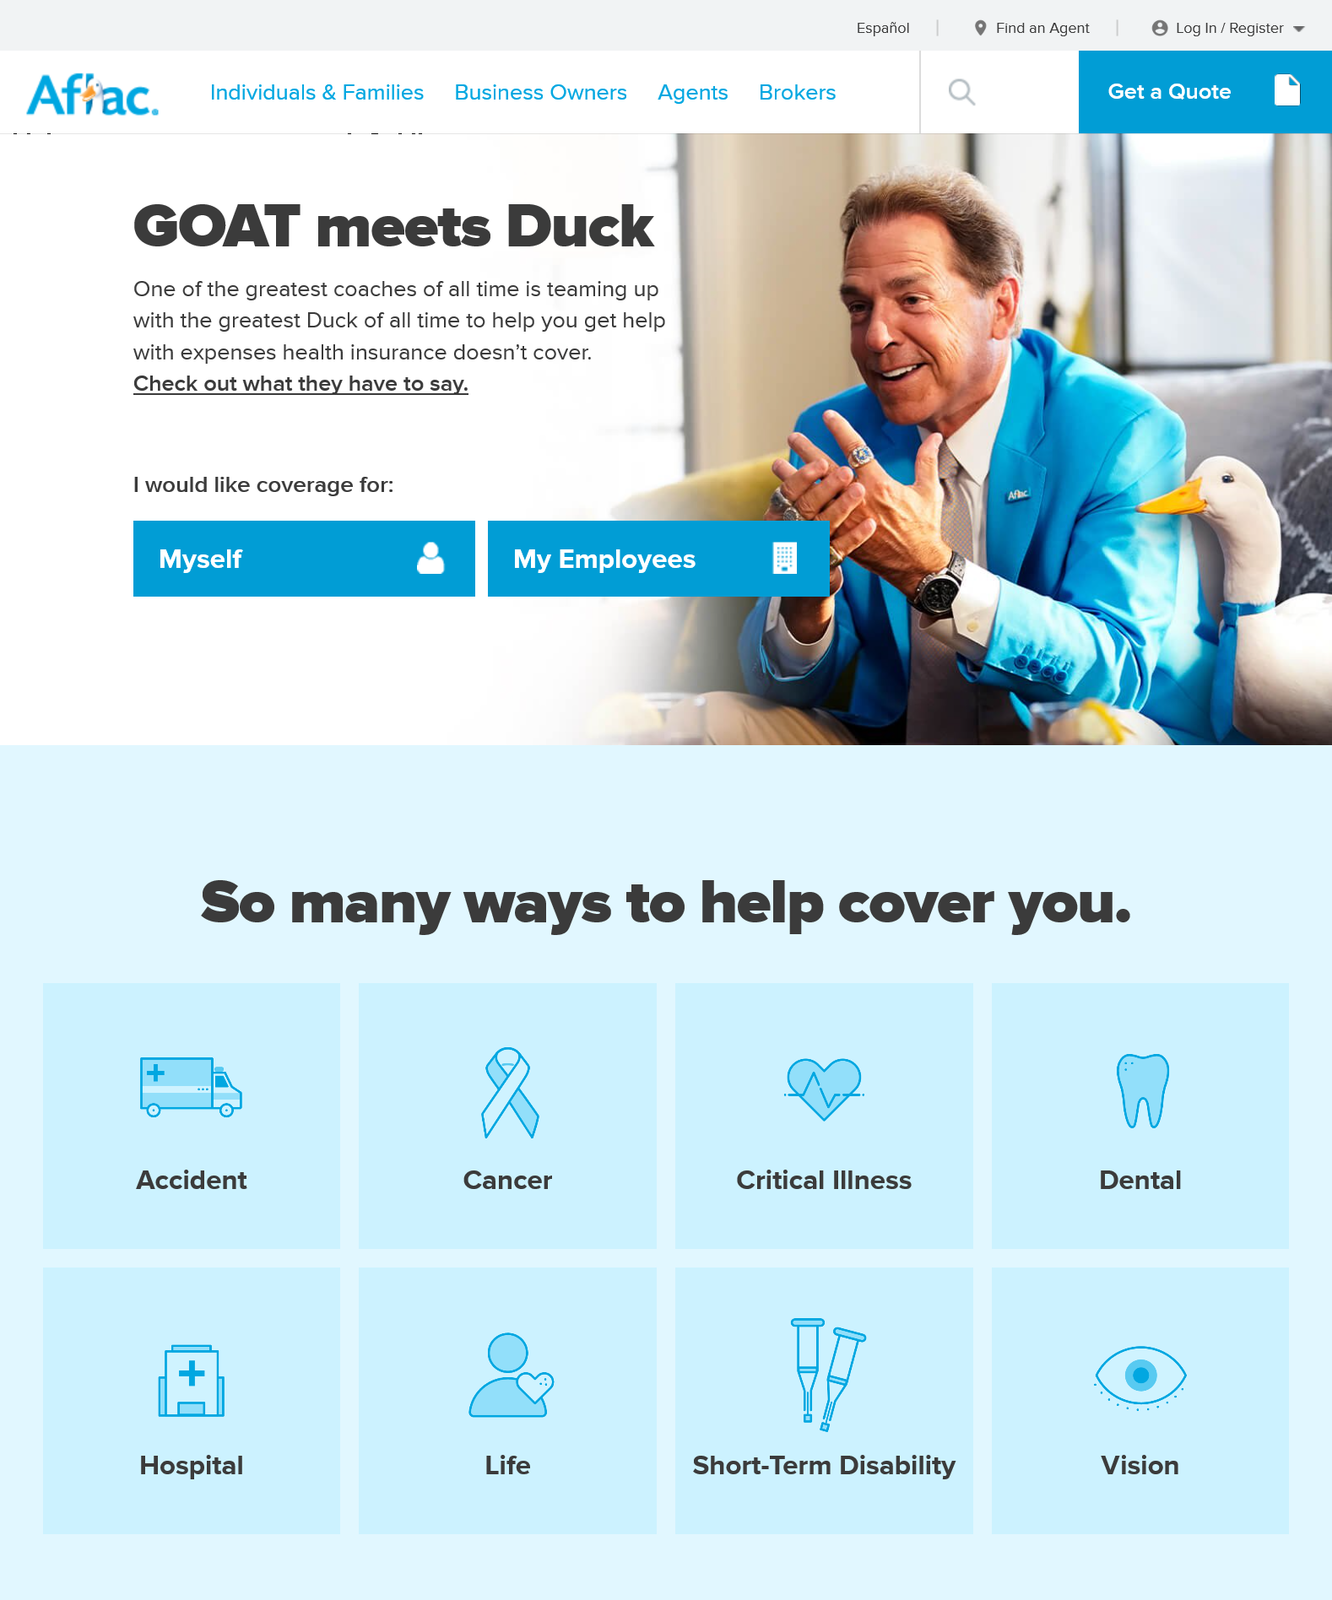 Aflac - Step-by-Step Claims